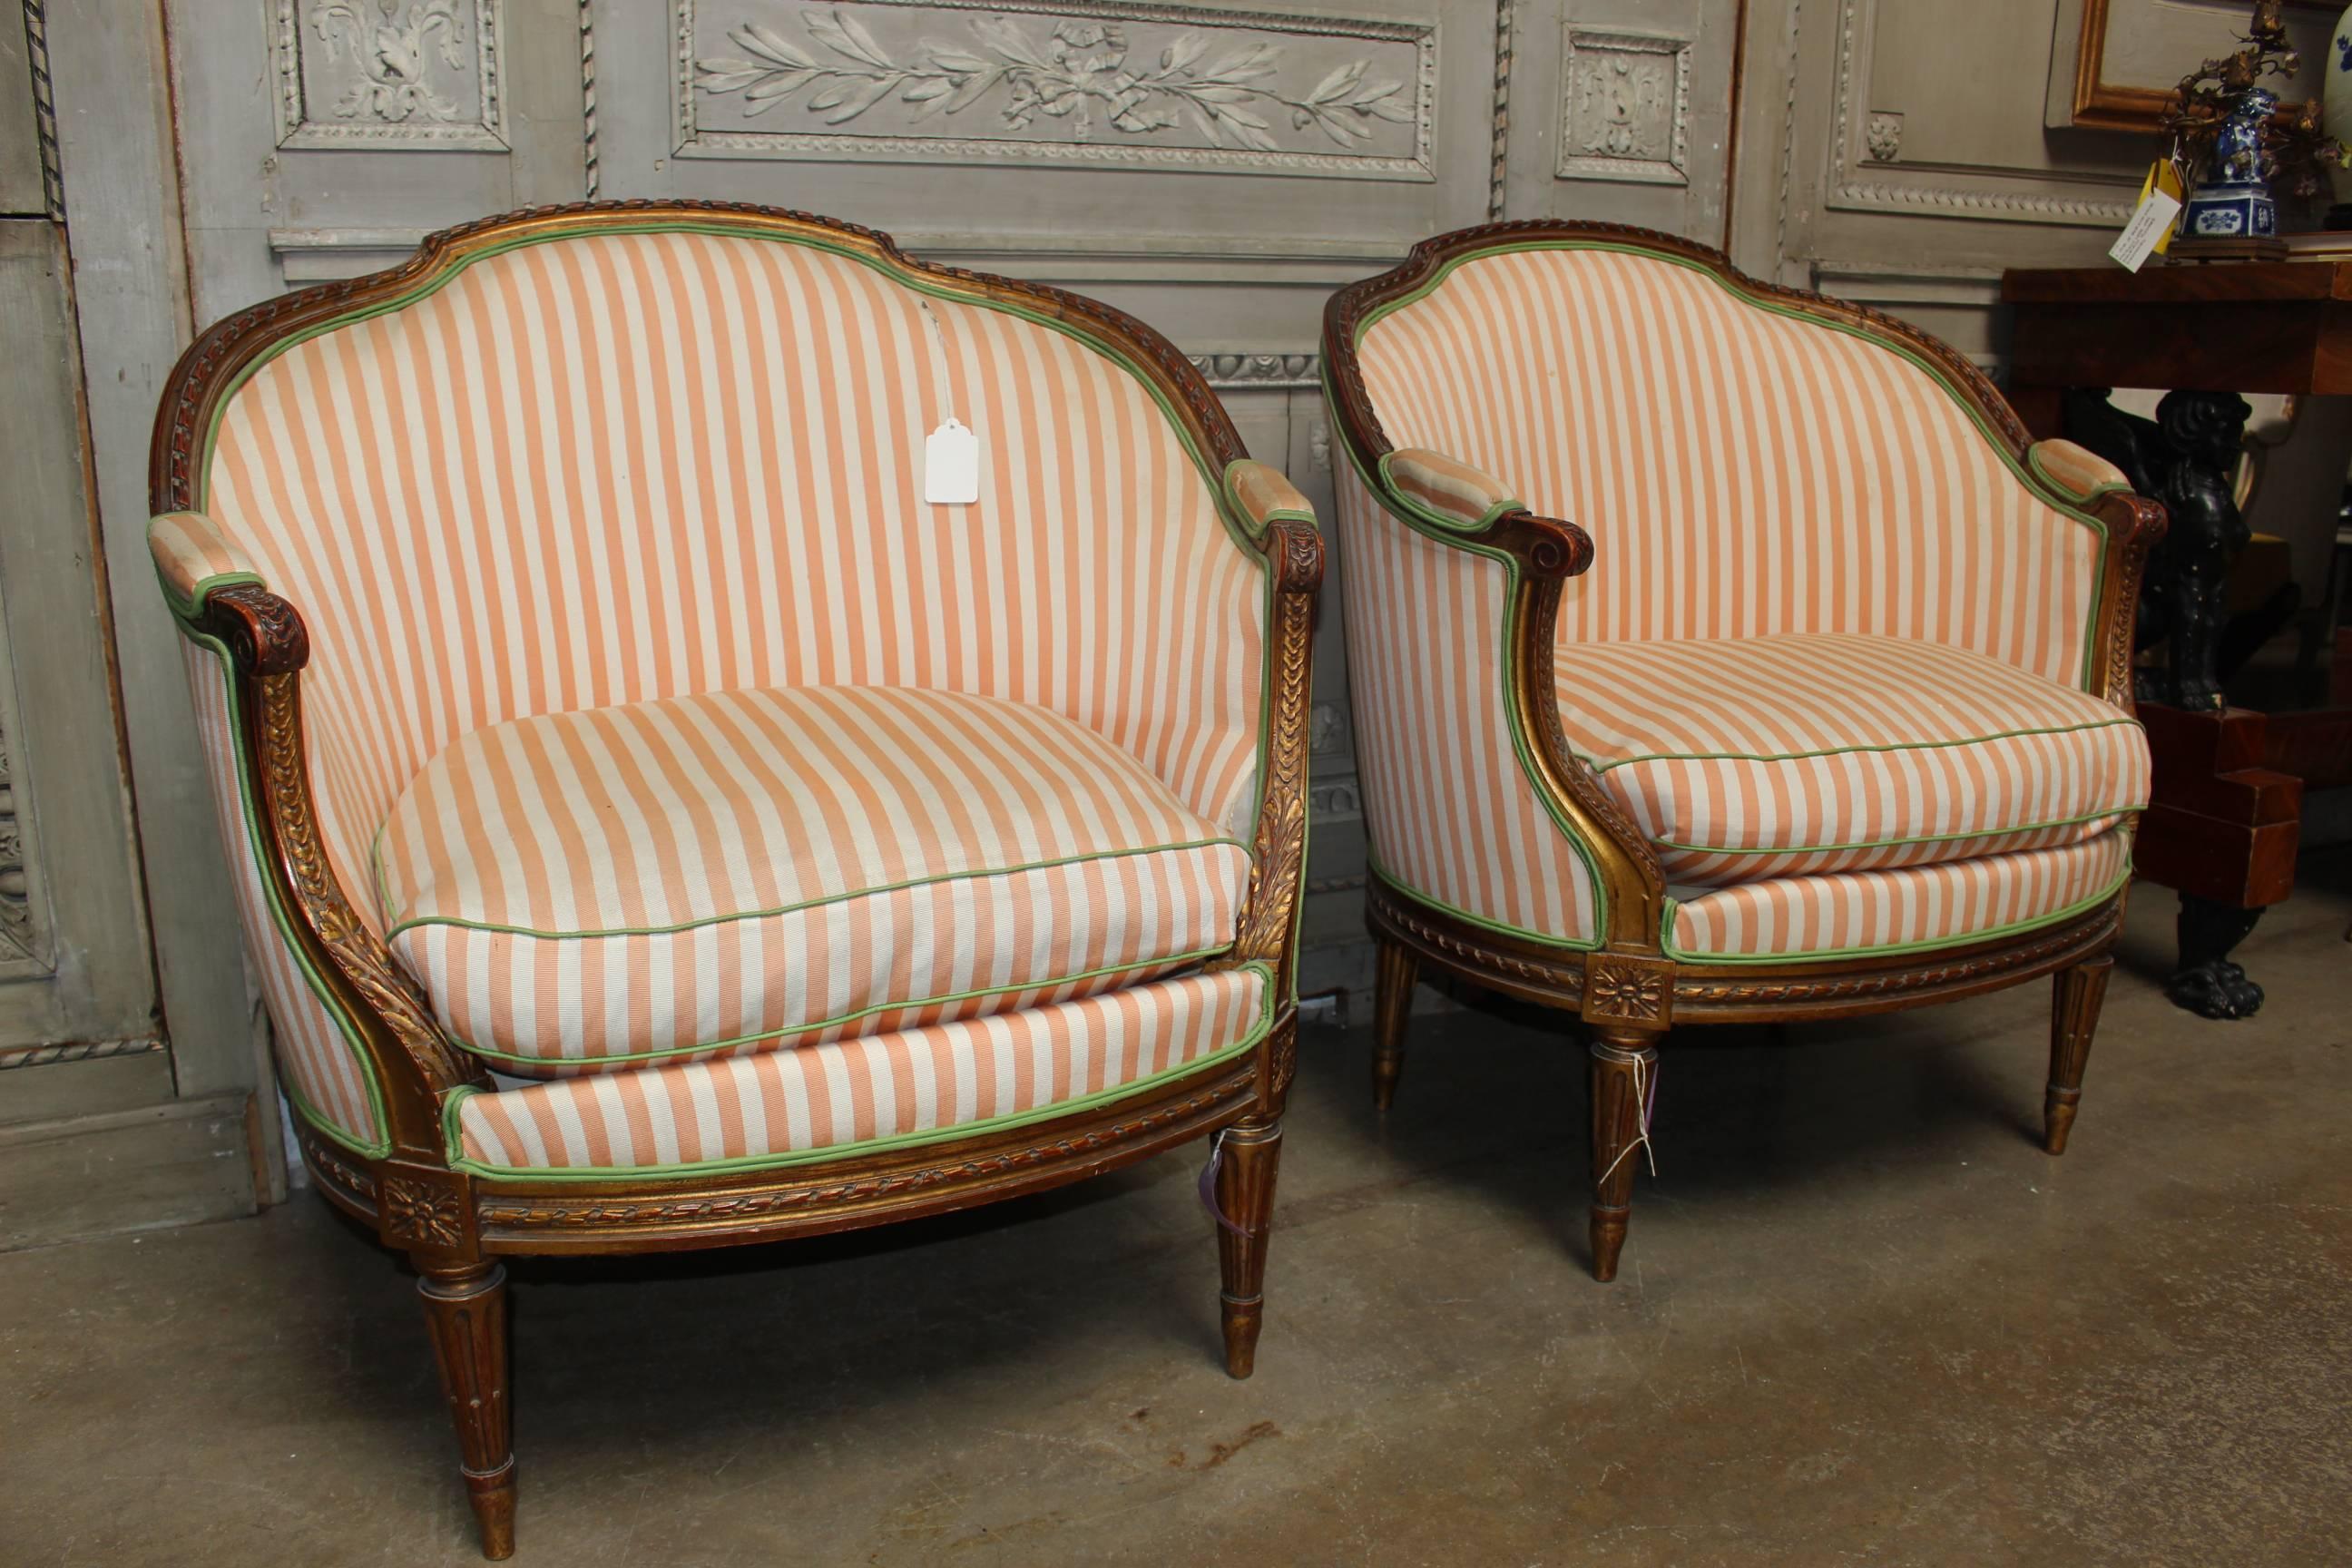 Pair of 19th century French Louis XVI style armchairs. These carved wood chairs are in a gold leaf finish and are known as marquise due to their extra wide seat, typically wider than they are deep, they were originally designed to accommodate wide